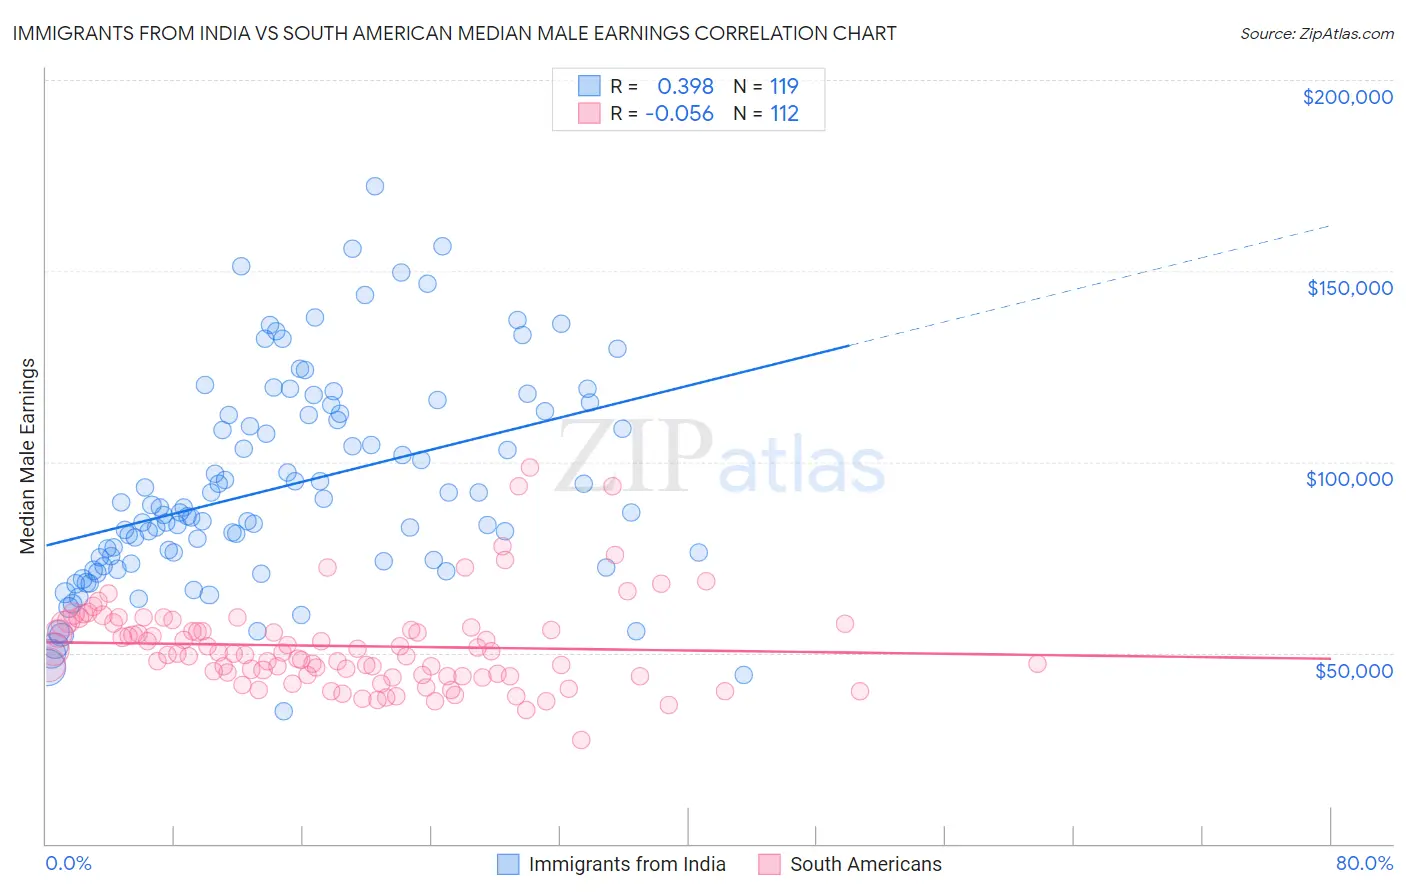 Immigrants from India vs South American Median Male Earnings